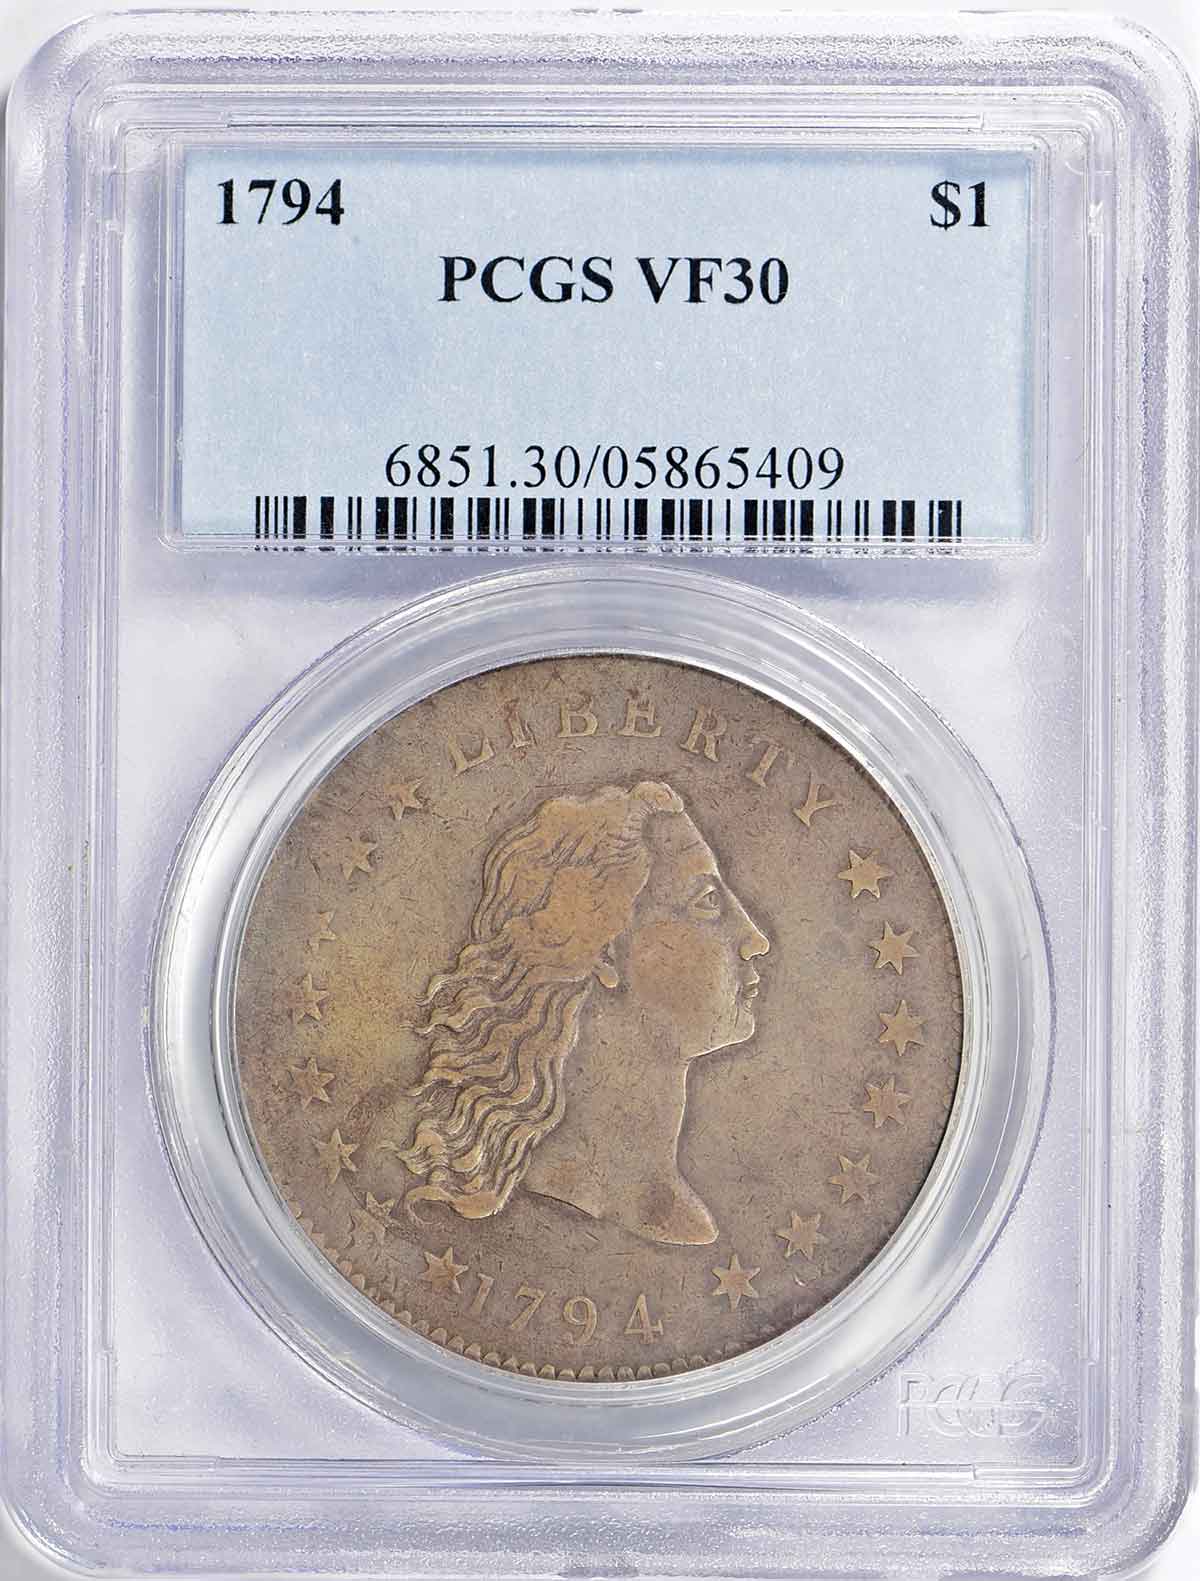 GreatCollections to Auction Rare Canadian Cents